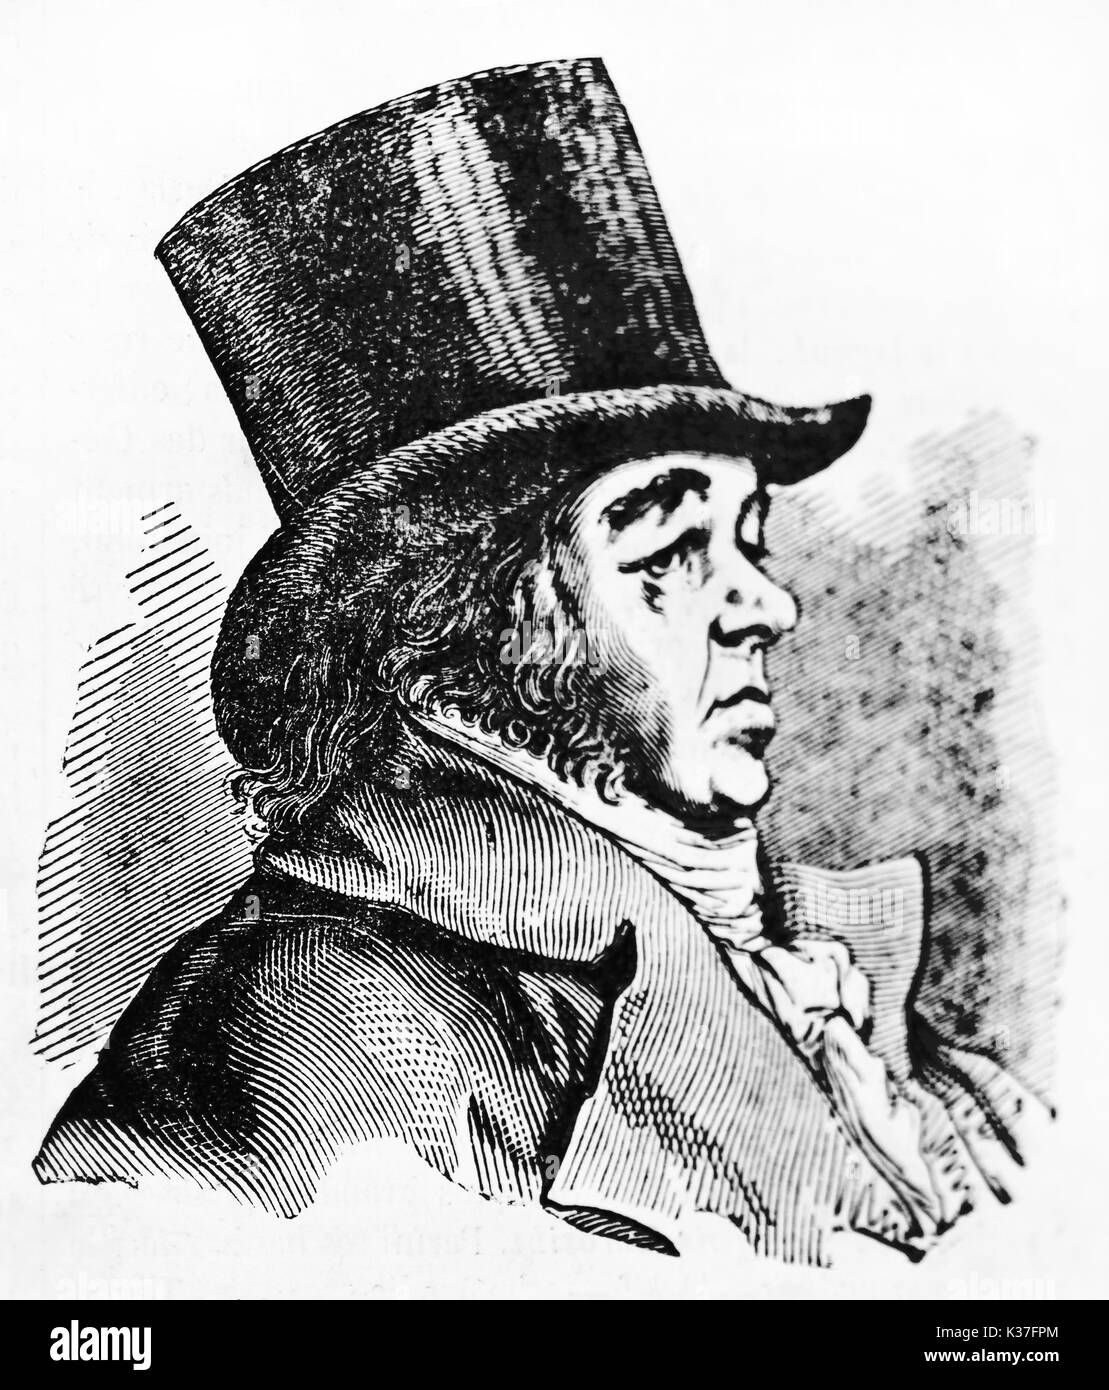 Ancient side view portrait of Francisco Goya (1746 - 1828), Spanish romantic painter, depicted on his profile wearing a top hat. By unidentified author published on Magasin Pittoresque Paris 1834 Stock Photo